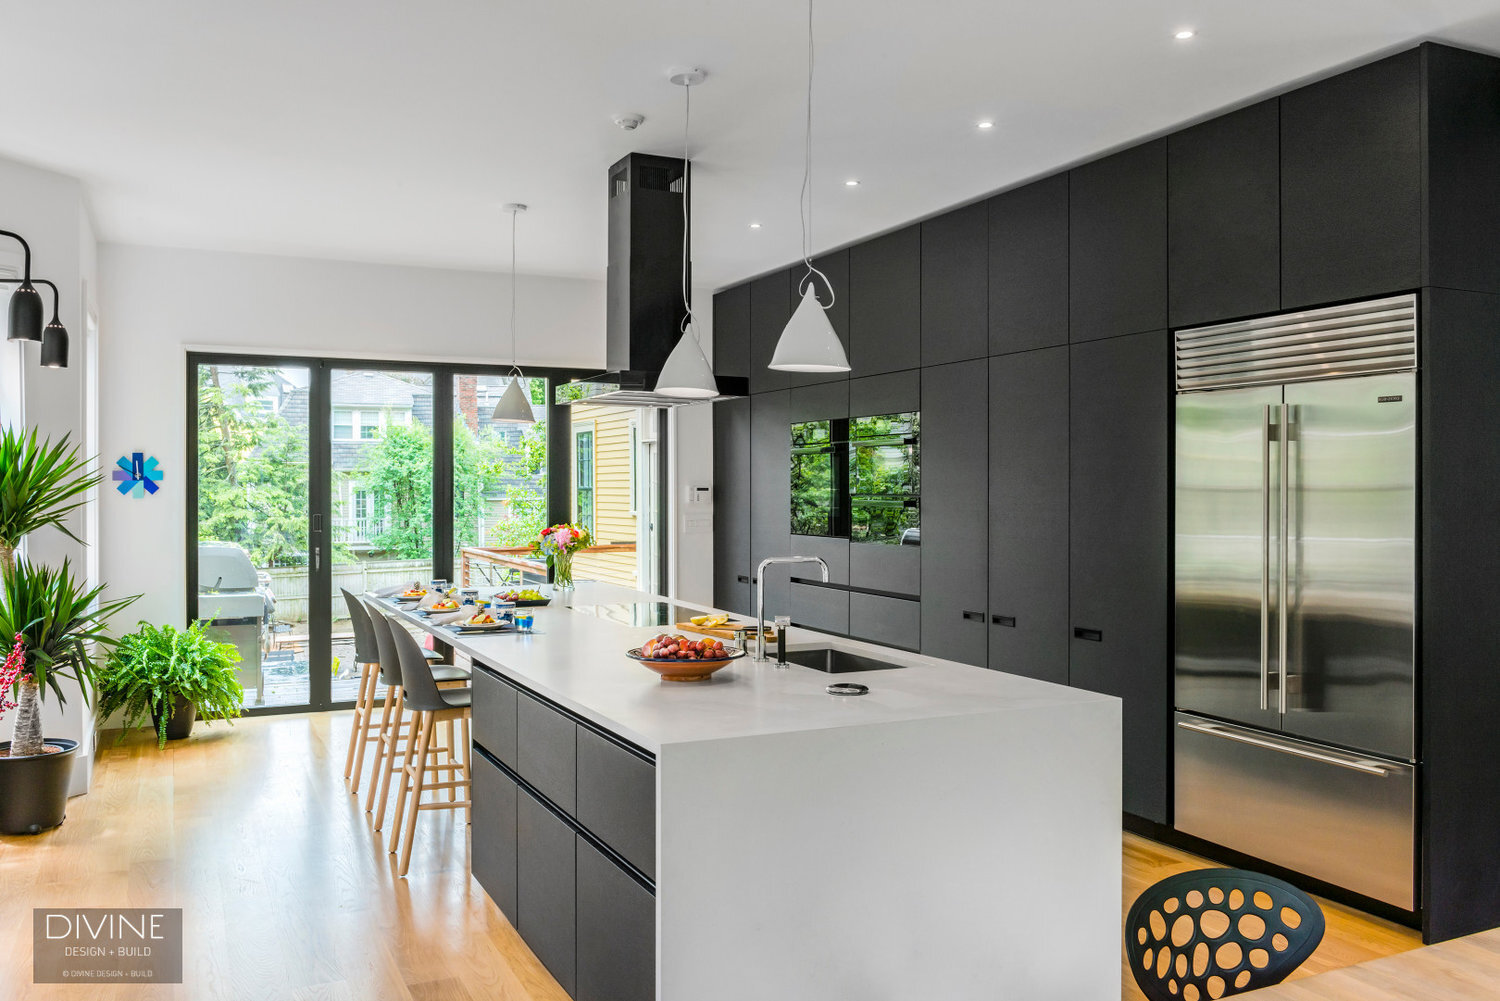 Go Modern and Contemporary with Black Kitchen Appliances  Black appliances  kitchen, Black kitchens, Grey kitchen cabinets